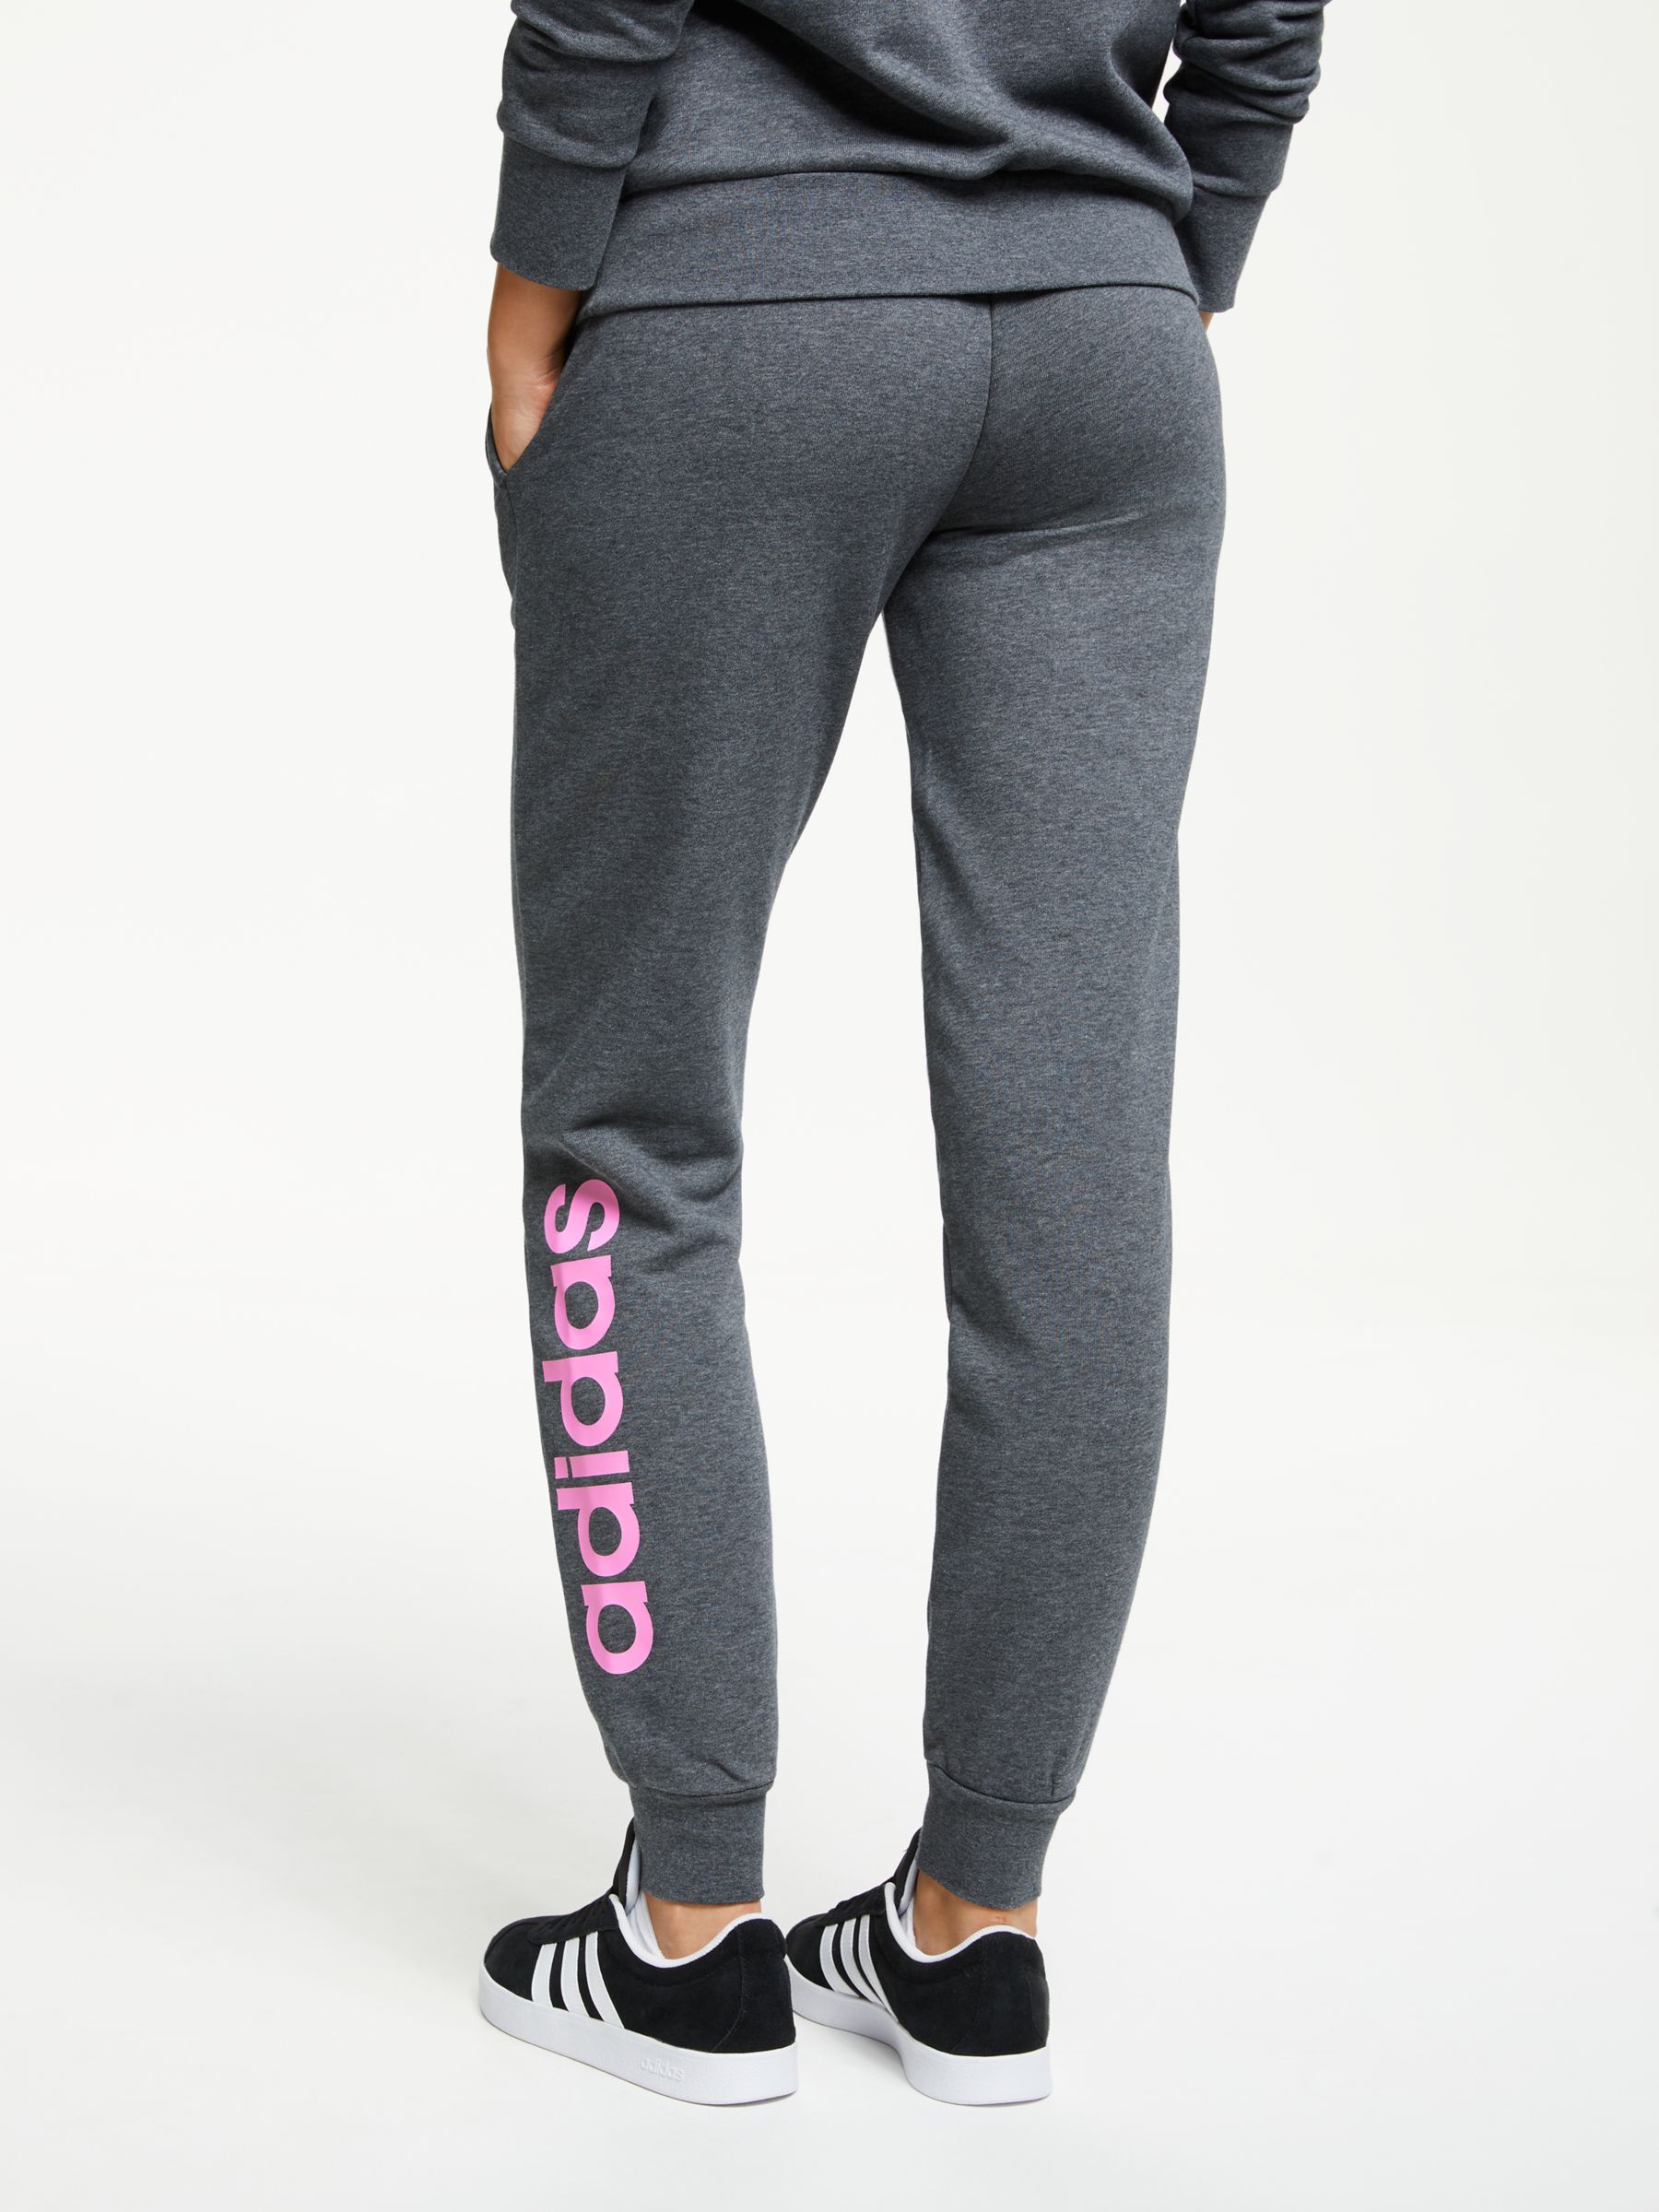 womens grey and pink adidas tracksuit